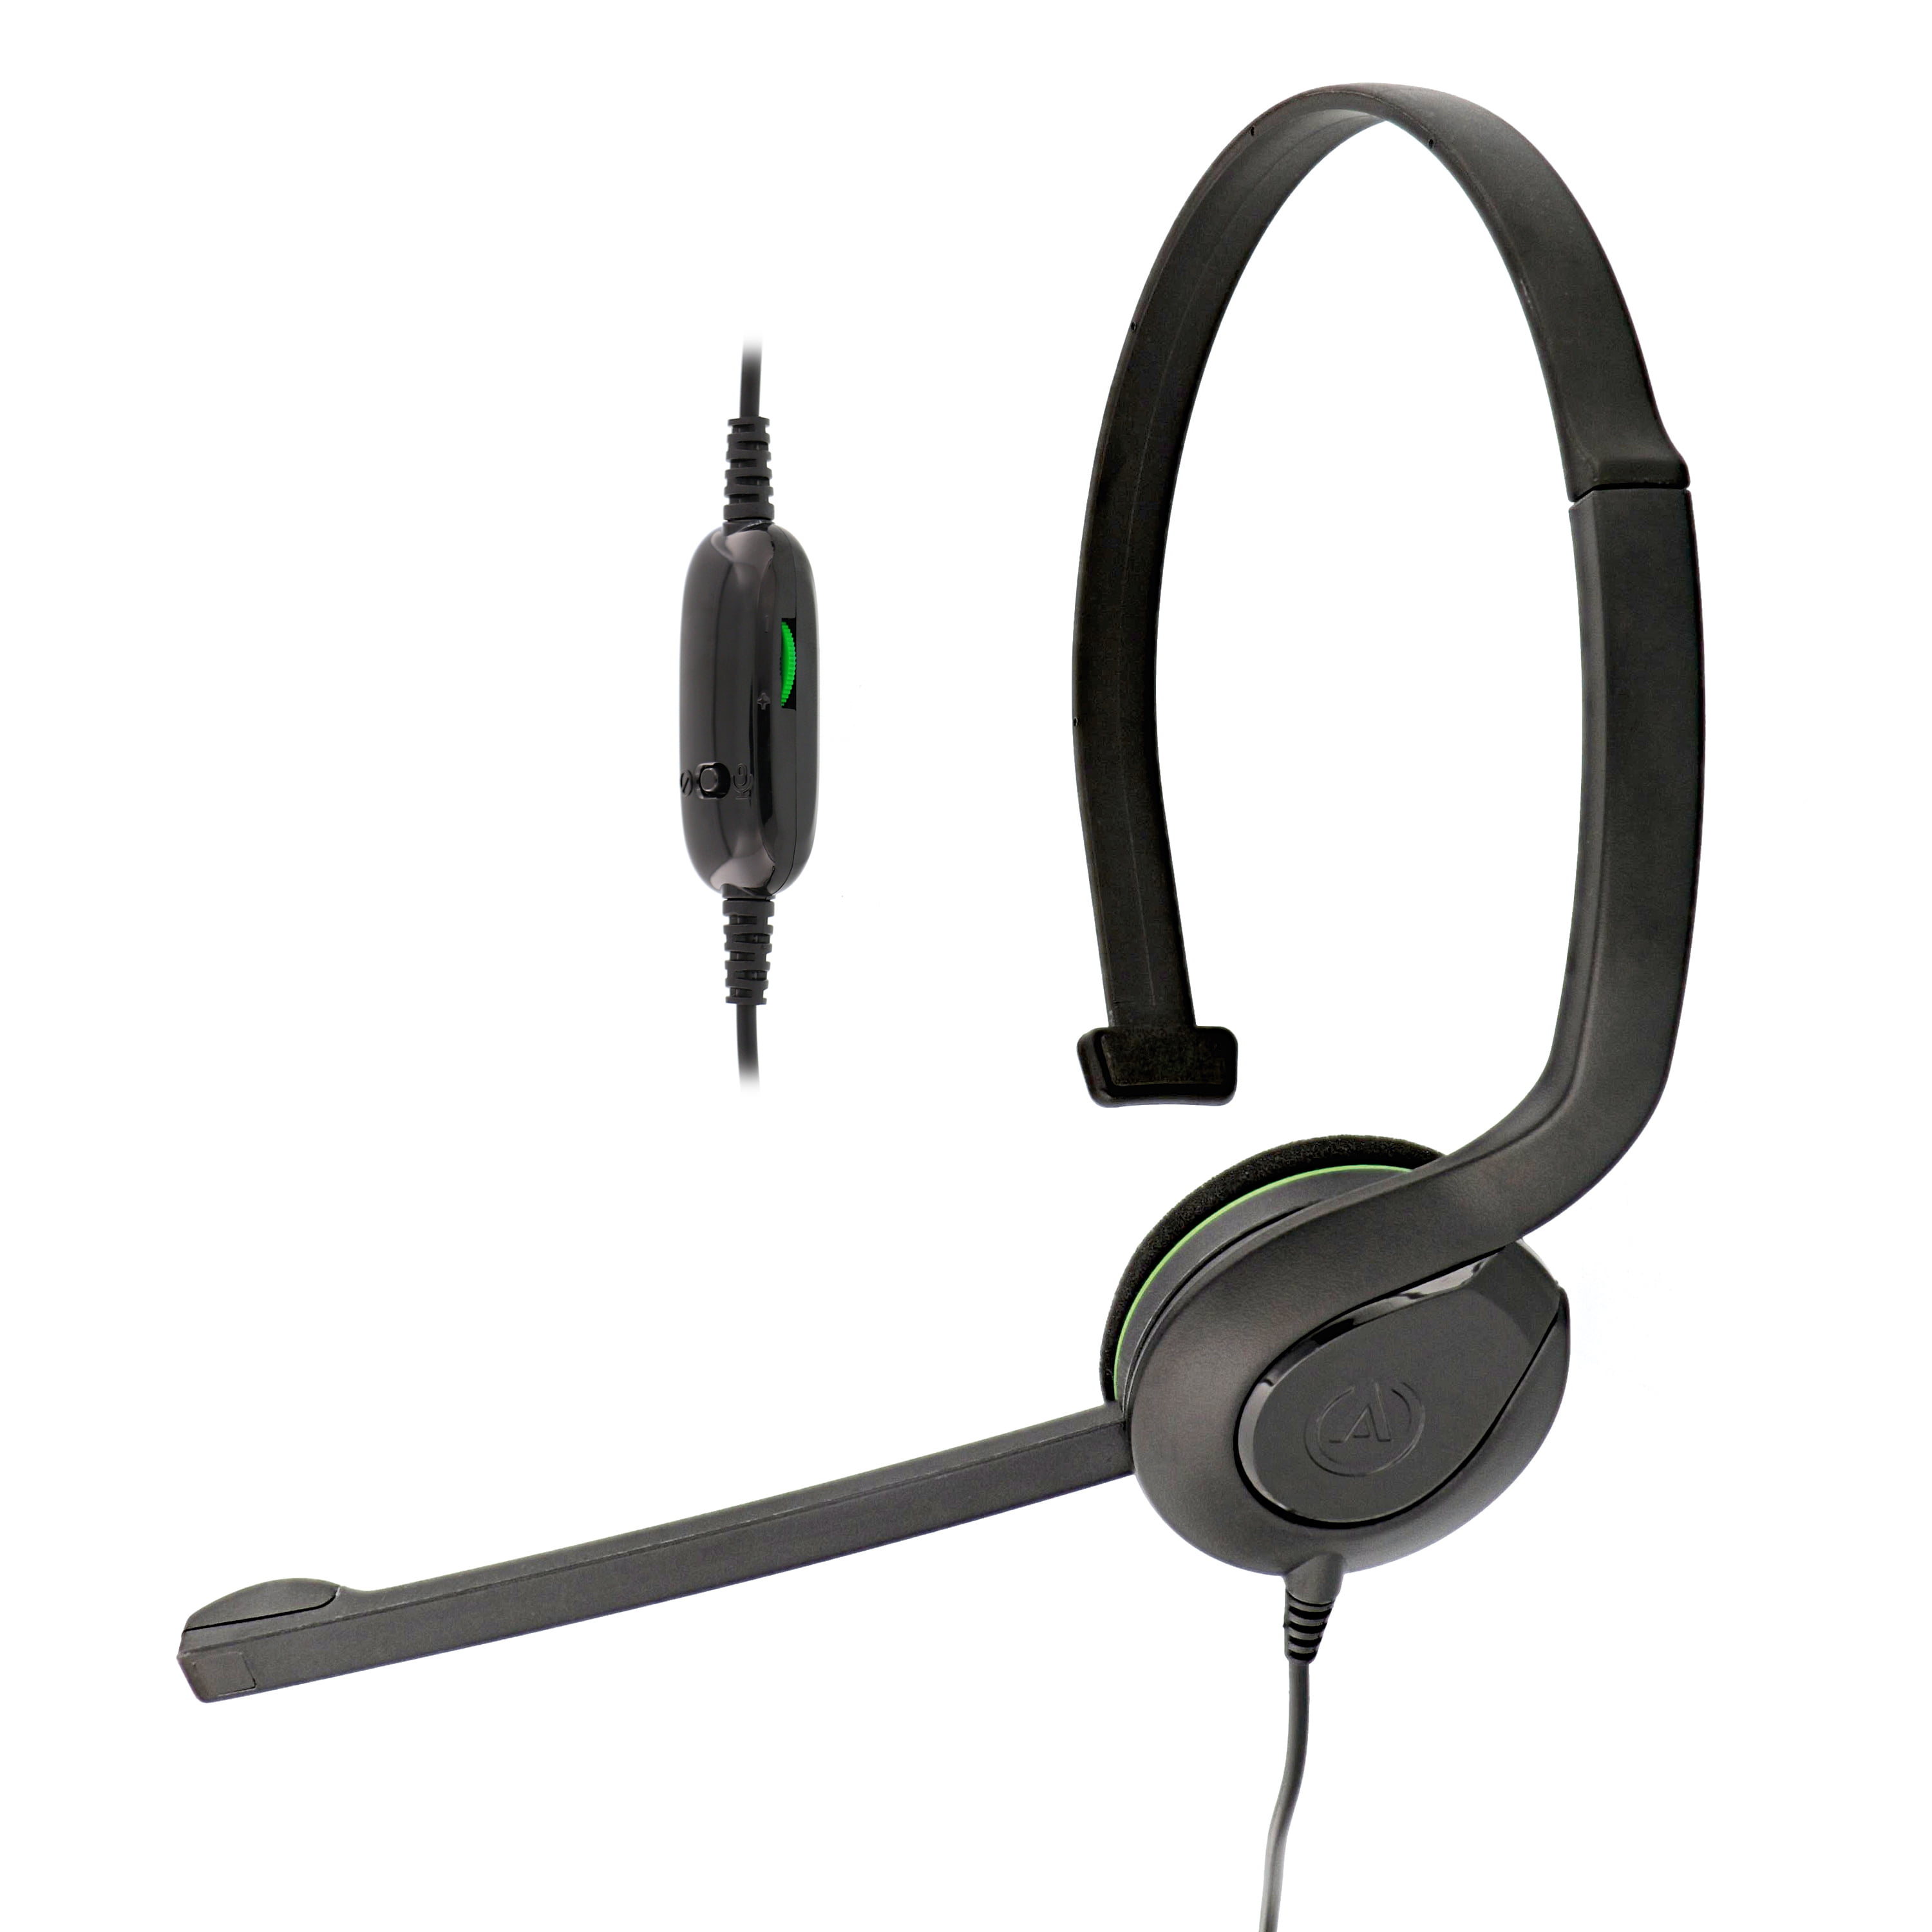 mic for xbox one headset